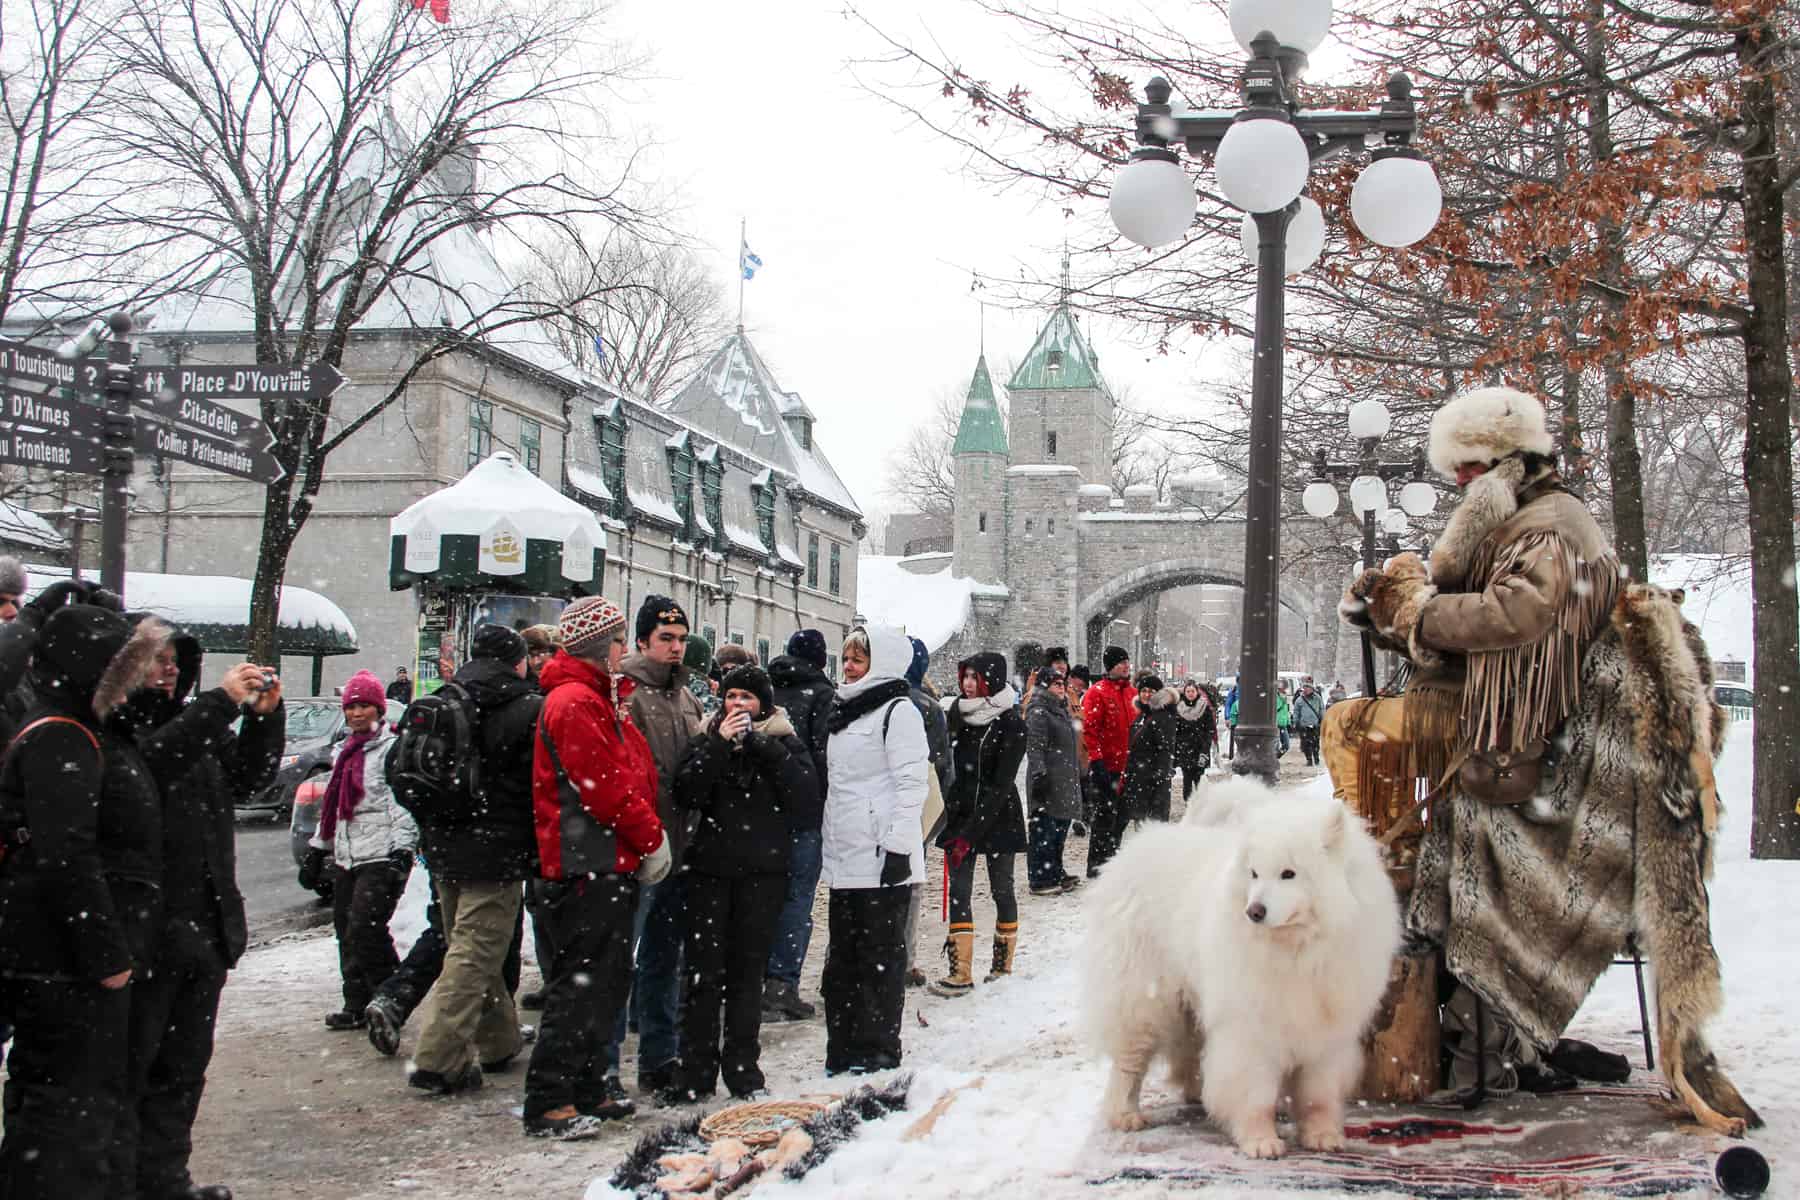 A man in a fur jacket sits on a chair next to a white dog on a long street in Quebec city in winter, as people observe.